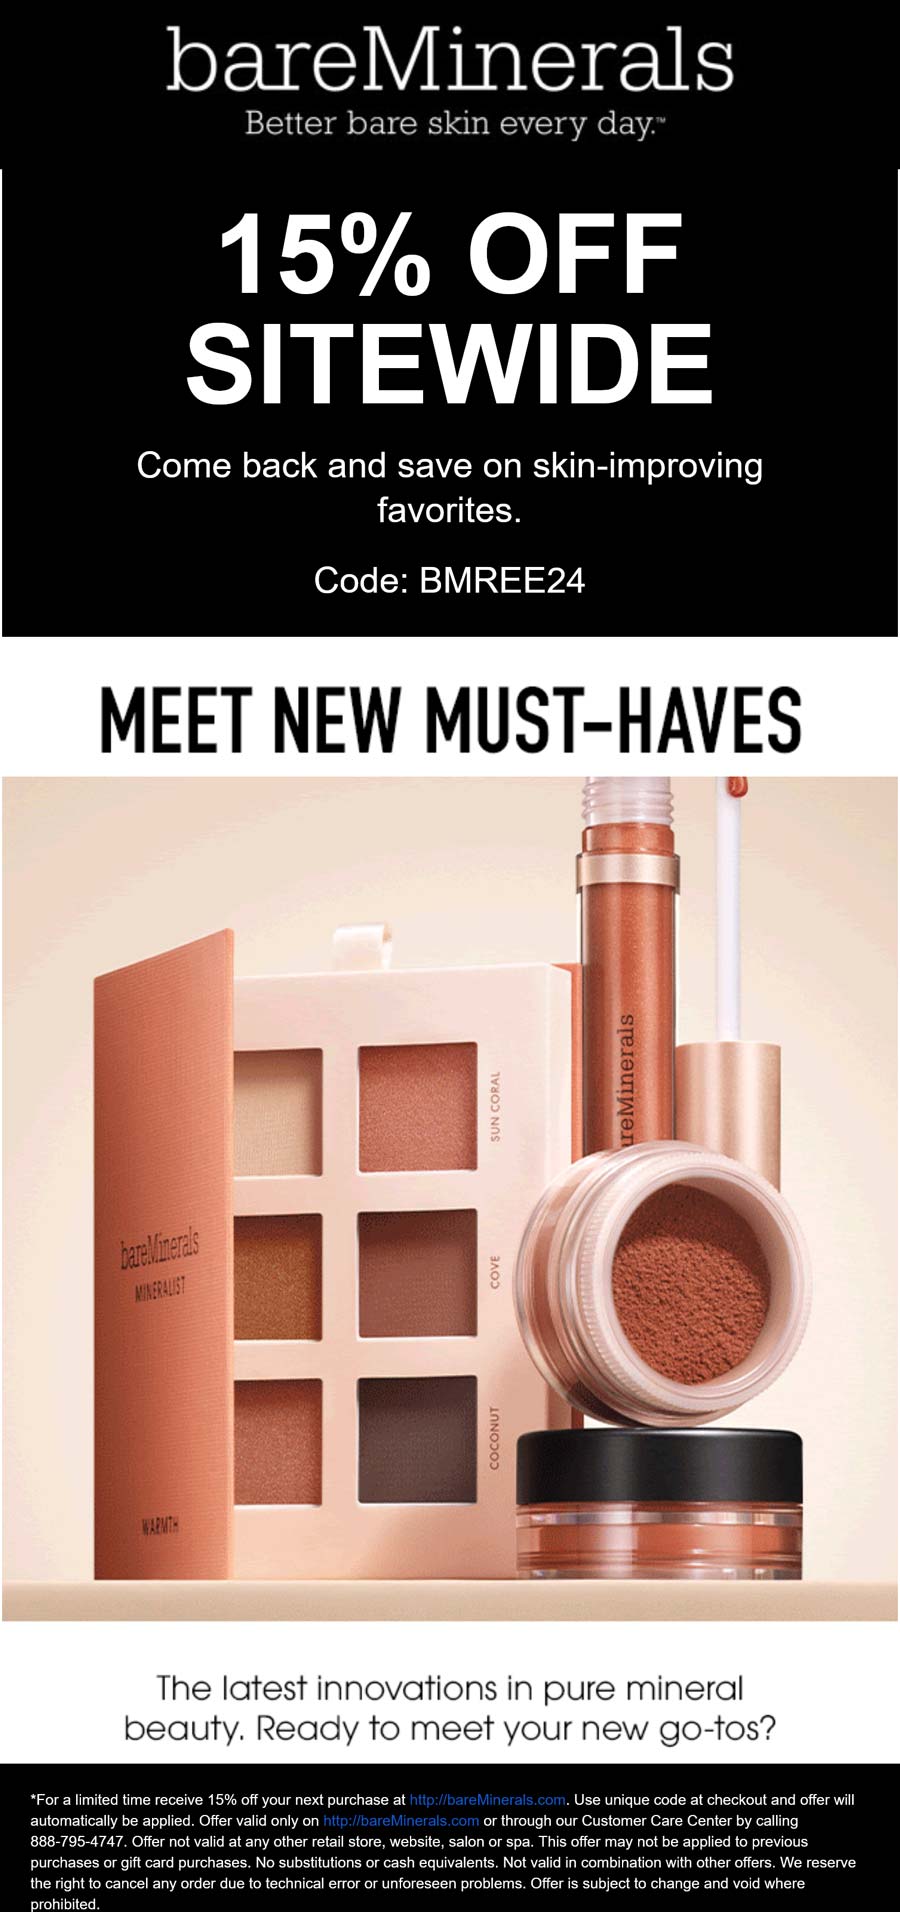 bareMinerals stores Coupon  15% off everything online at bareMinerals via promo code BMREE24 #bareminerals 